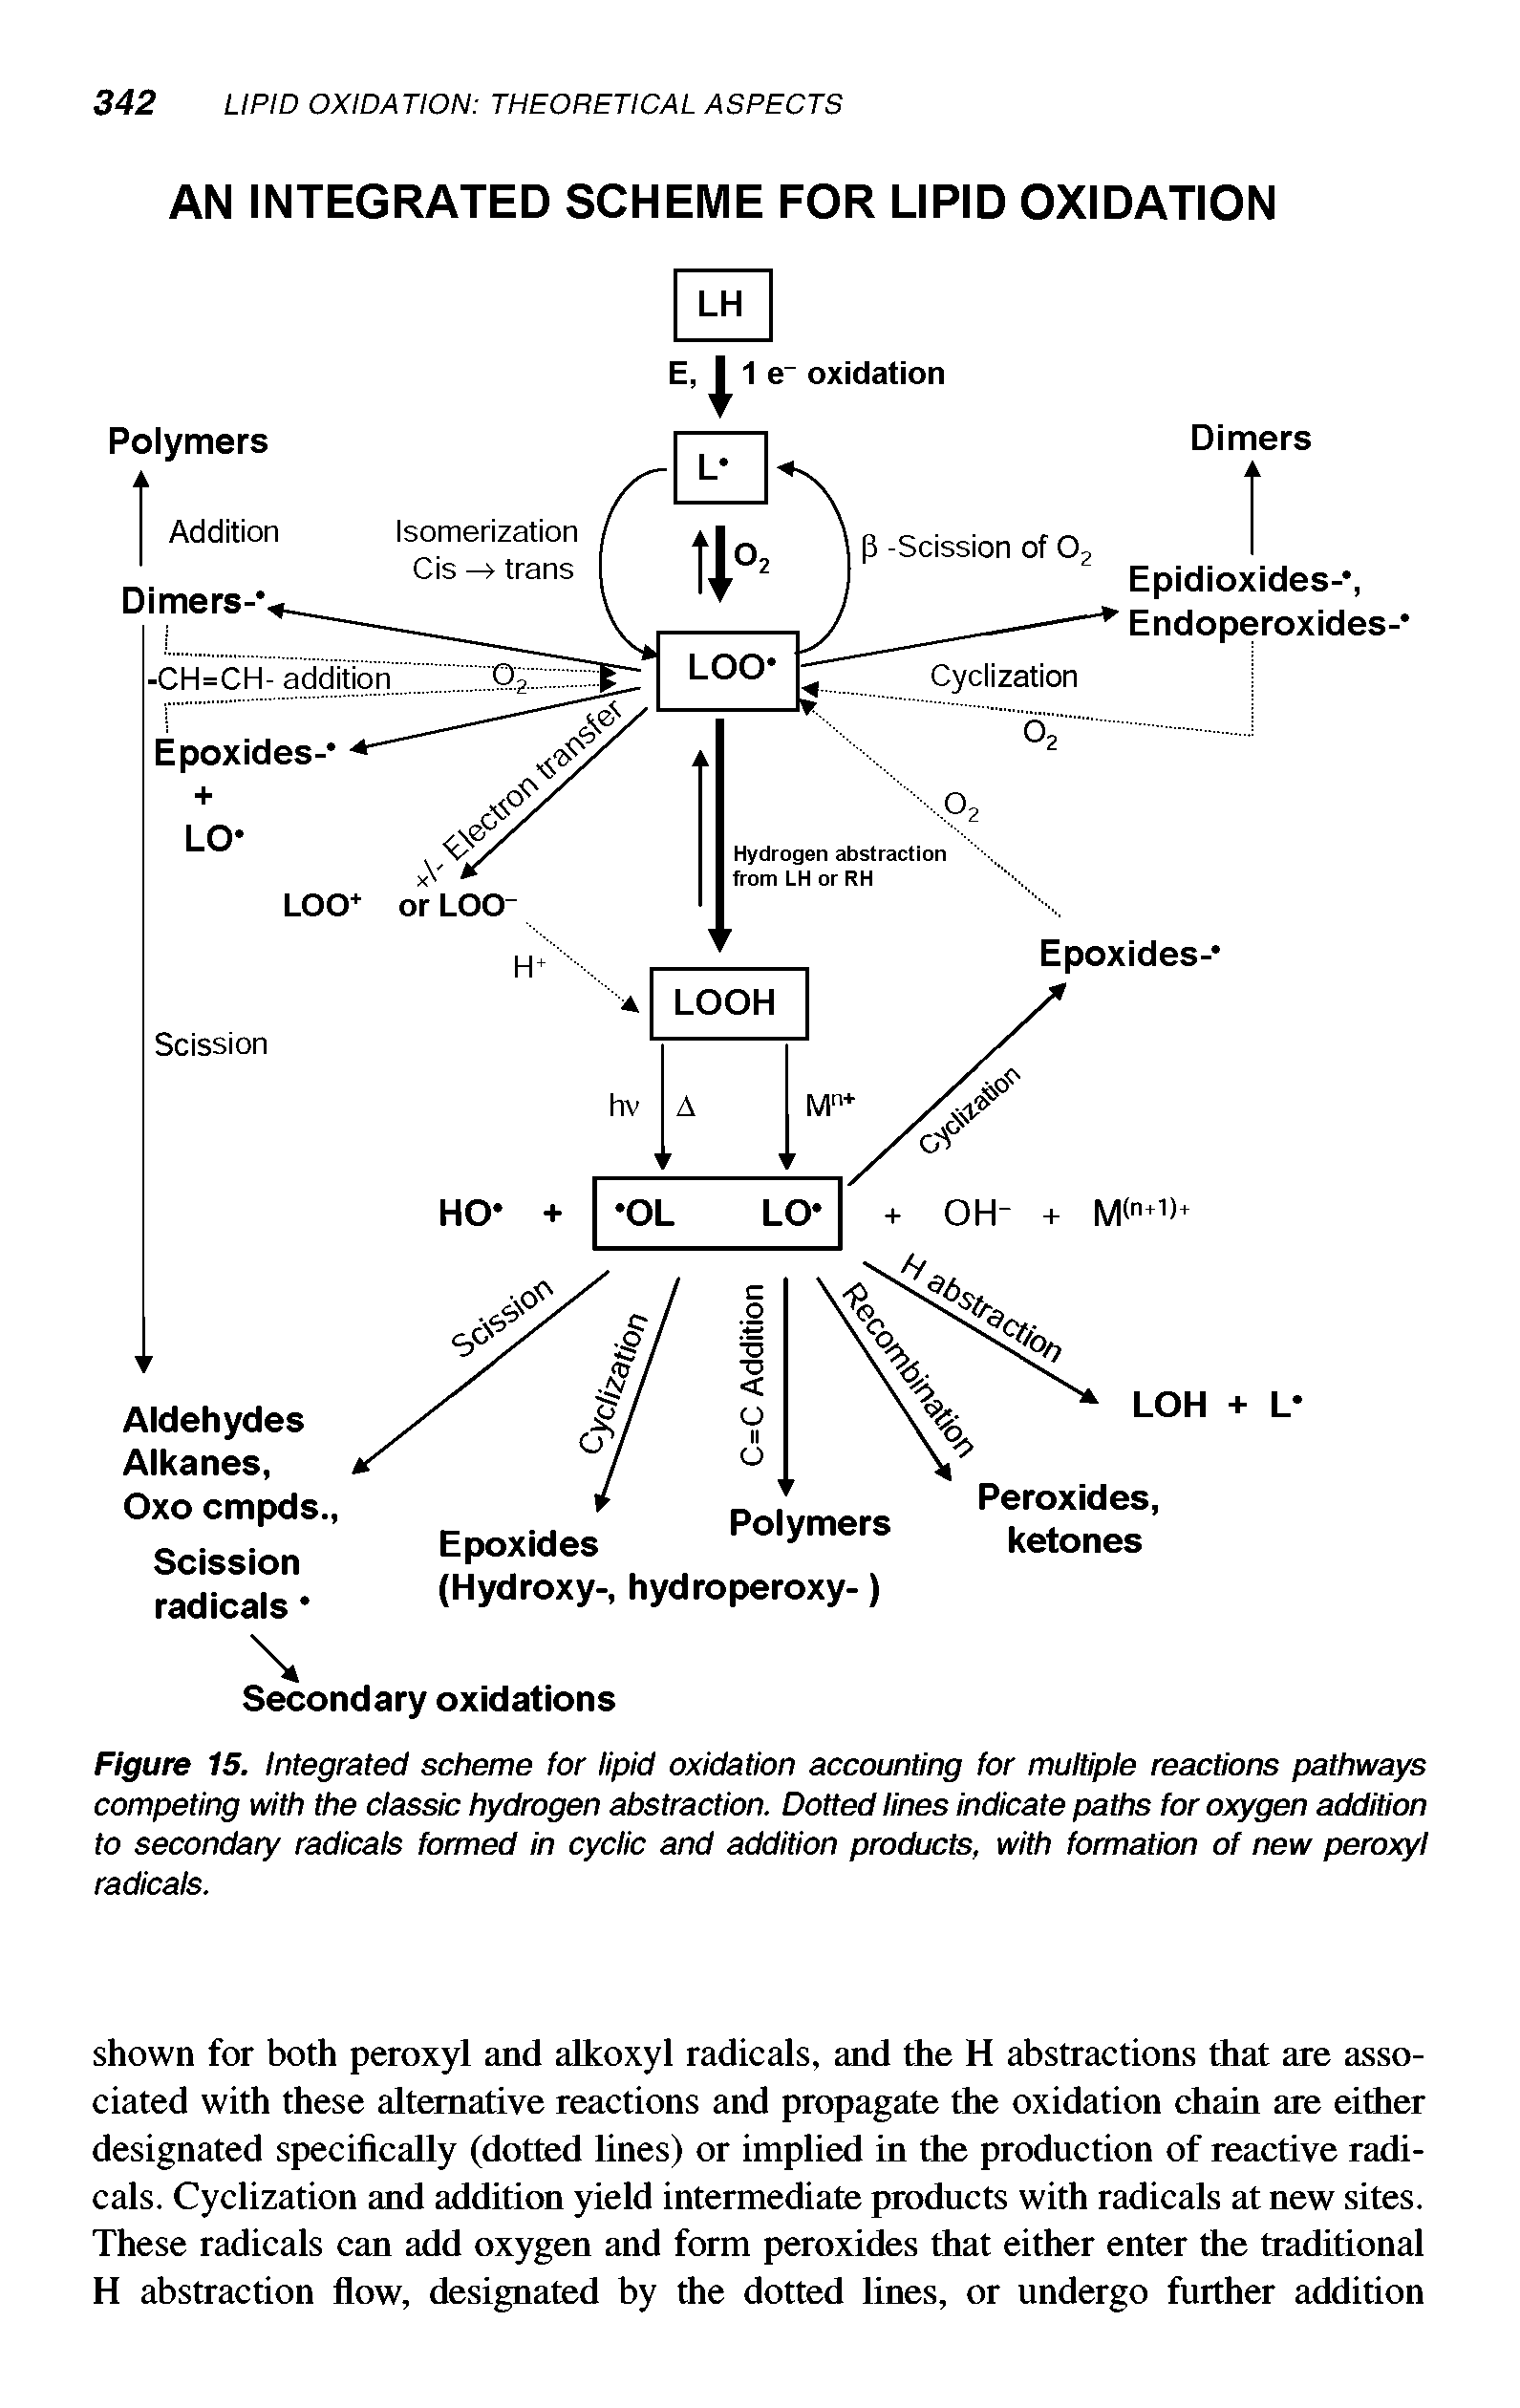 Figure 15. Integrated scheme for lipid oxidation accounting for multiple reactions pathways competing with the classic hydrogen abstraction. Dotted lines indicate paths for oxygen addition to secondary radicals formed in cyclic and addition products, with formation of new peroxyl radicals.